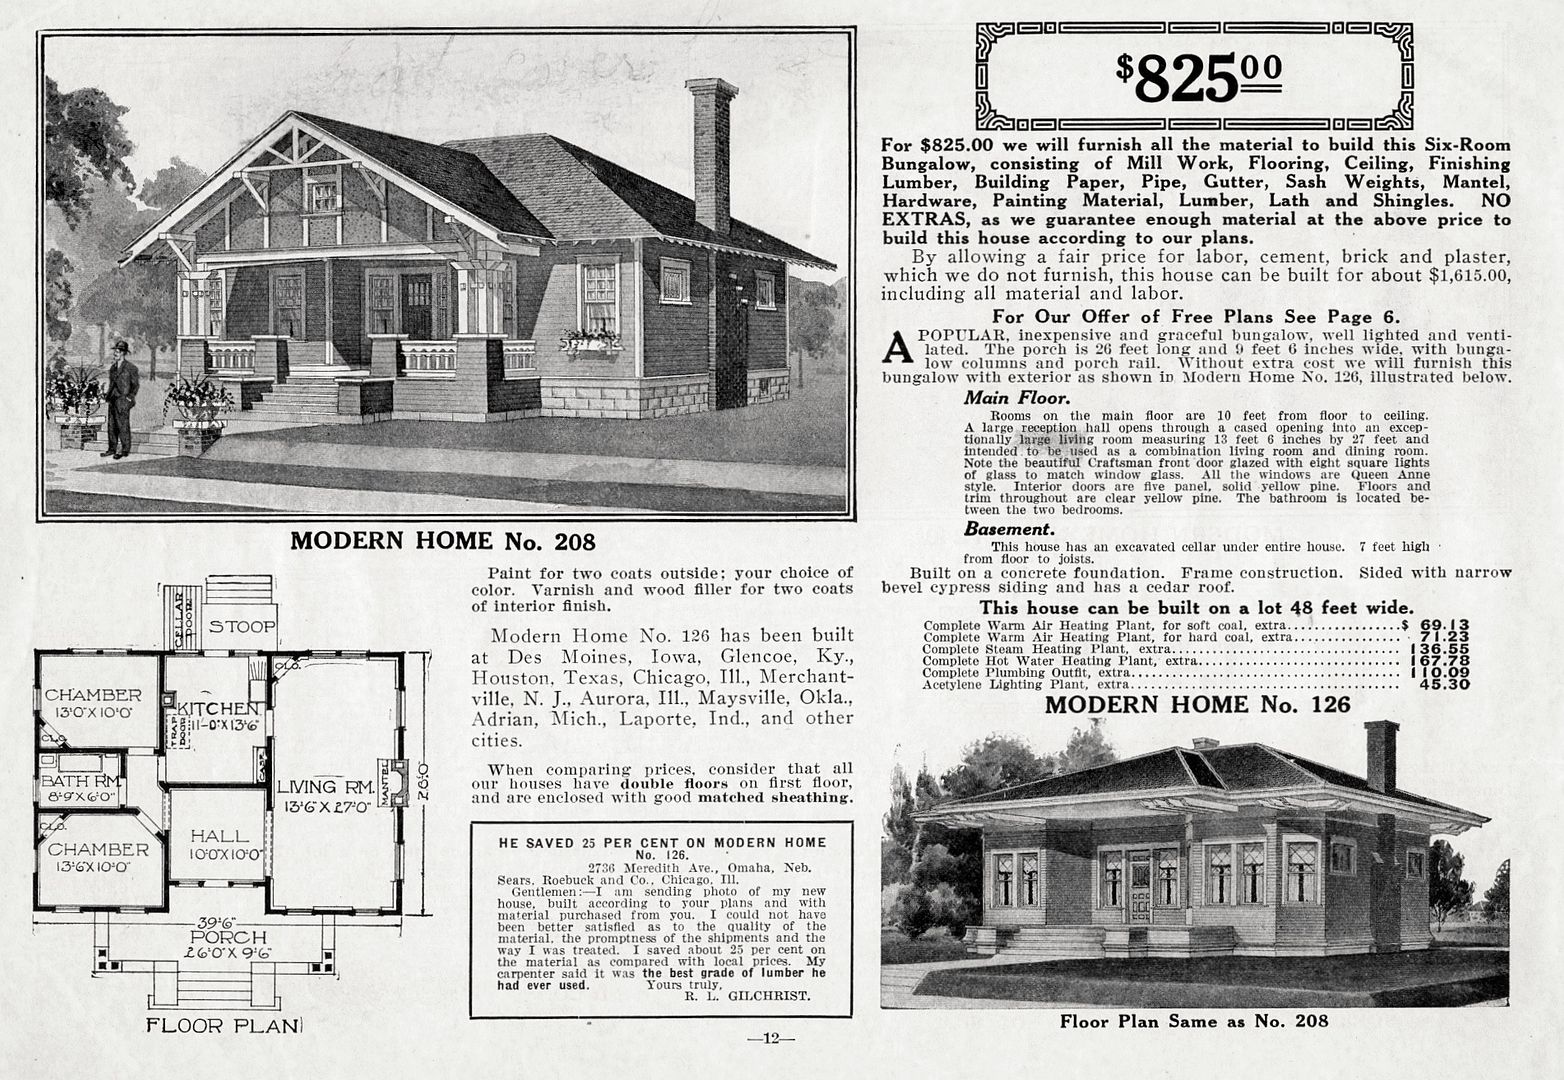 By 1914, Sears Modern Home #126 was relegated to sharing a page with the newly offered Modern Home #208 which would later be known as the Sears Elsmore. 